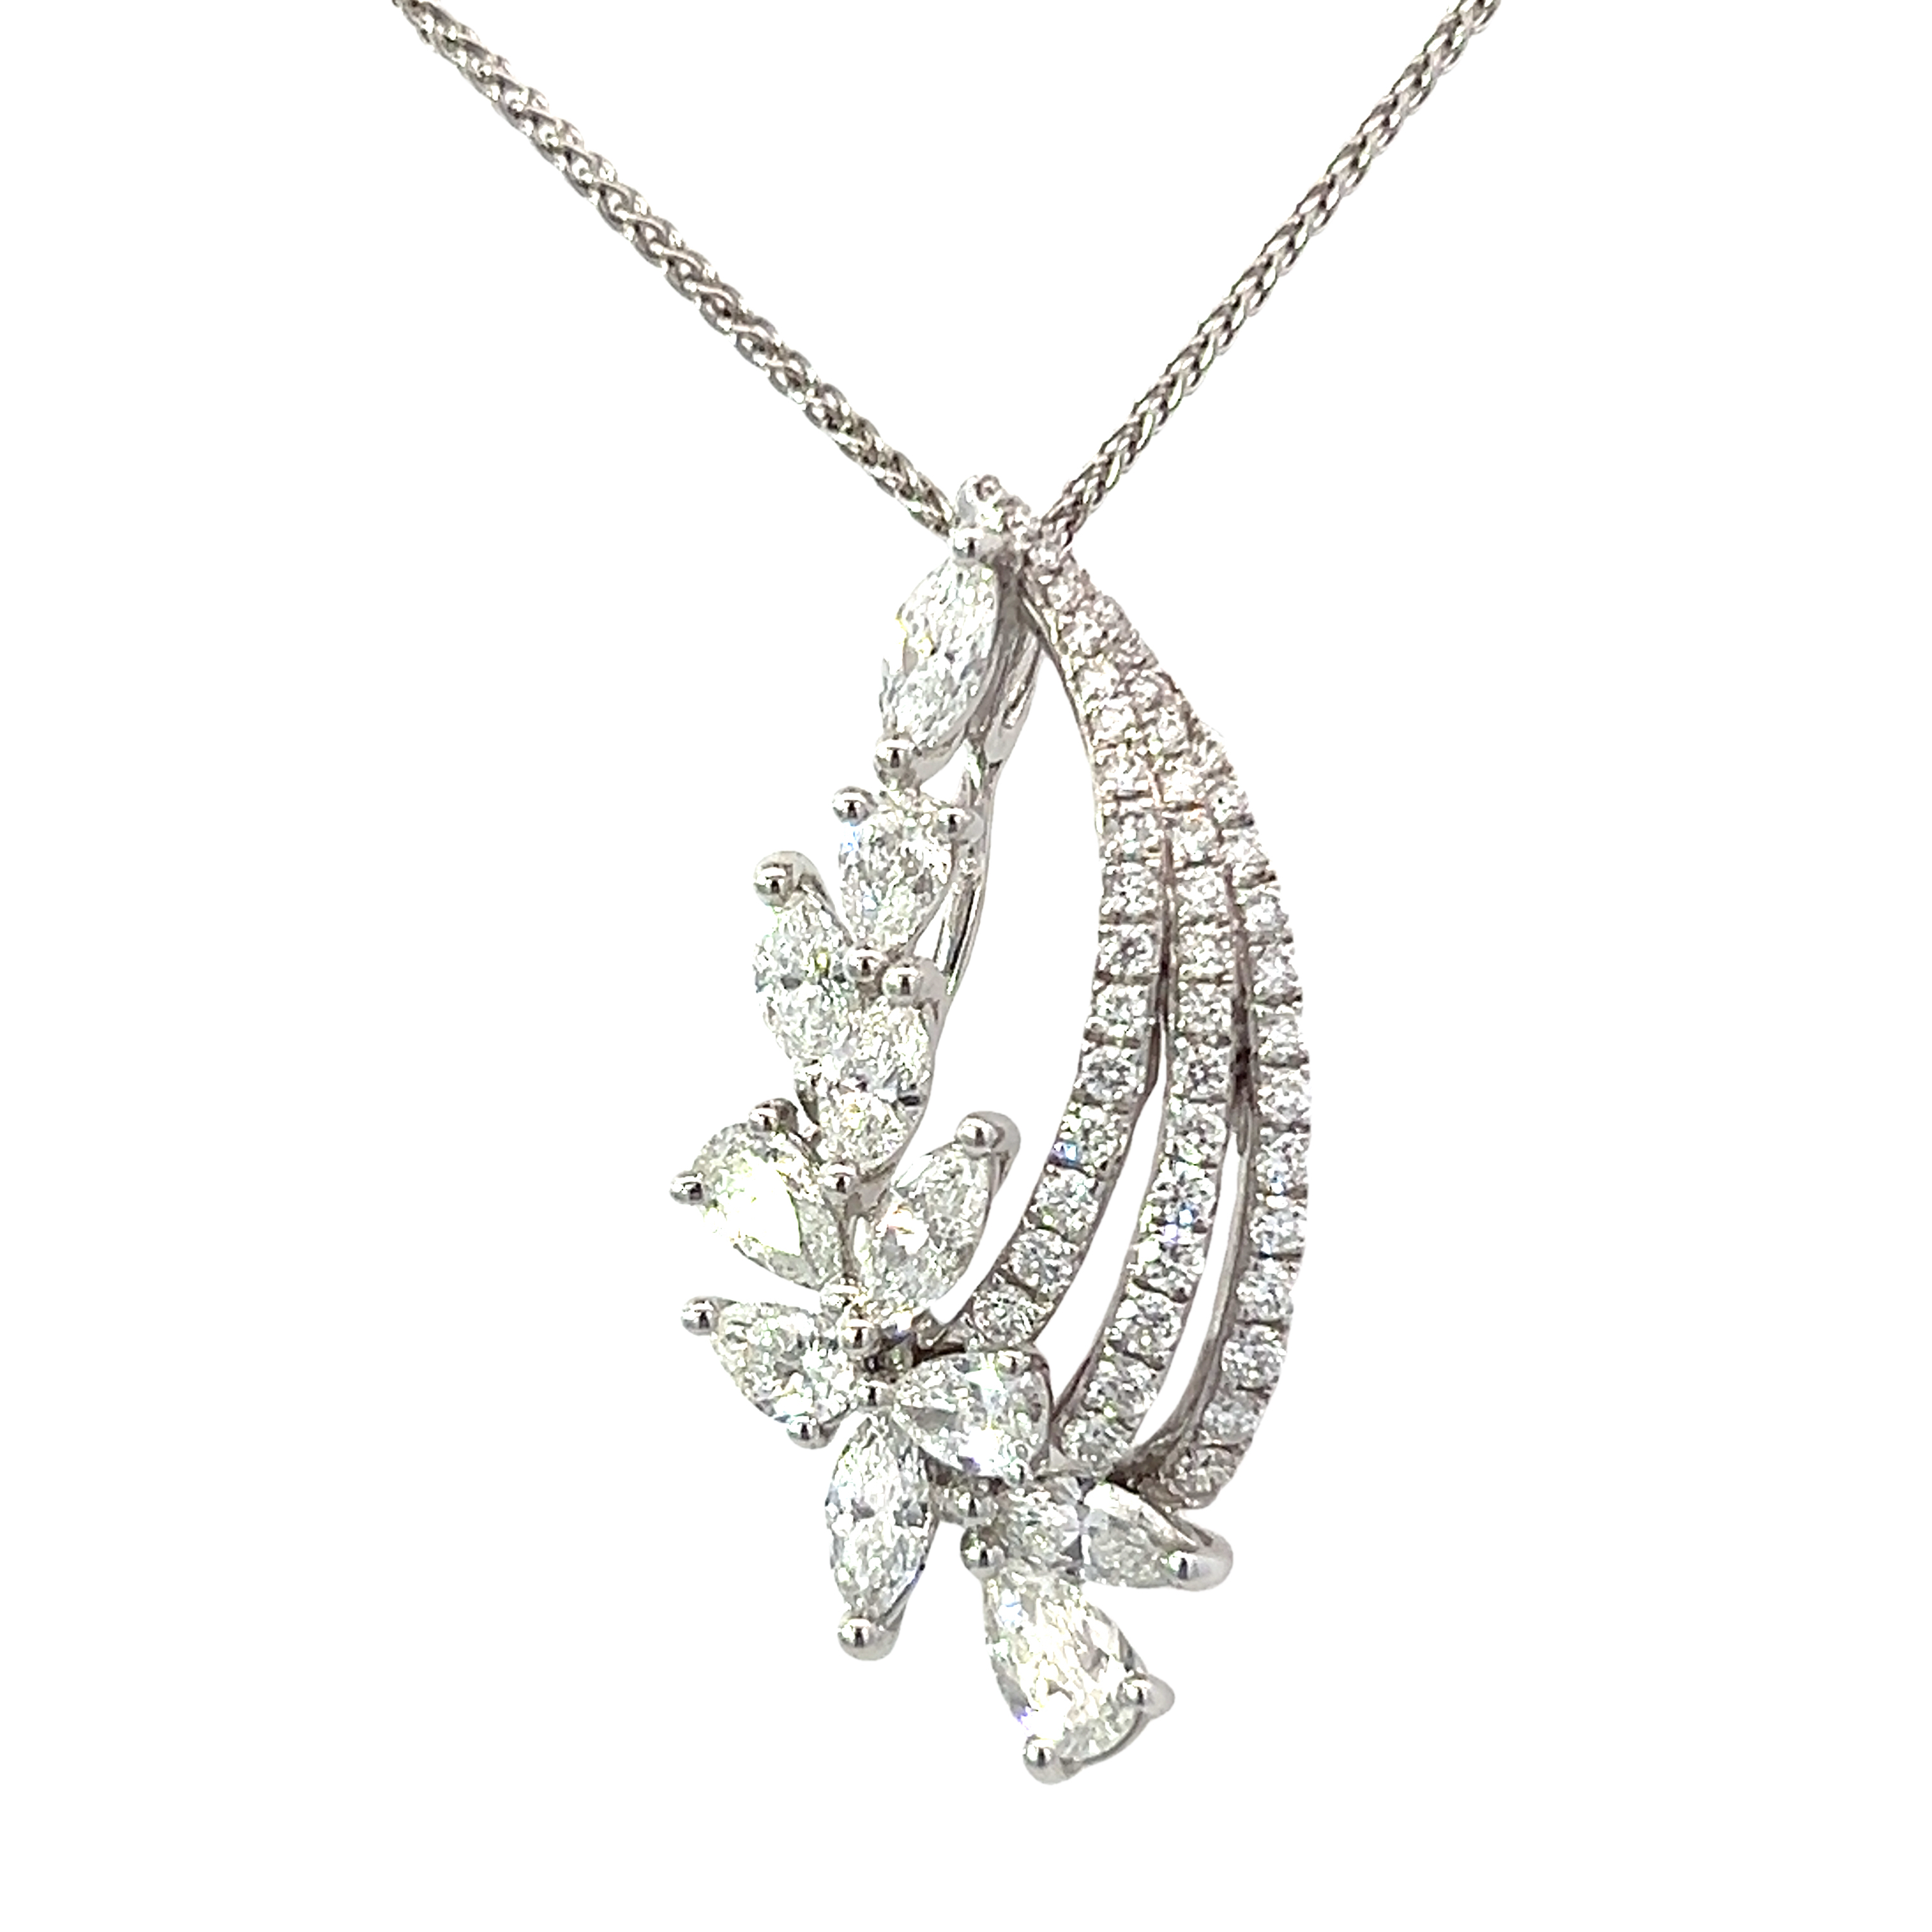 18 Carat White Gold and Diamond Floral 'Shooting Star' Pendant